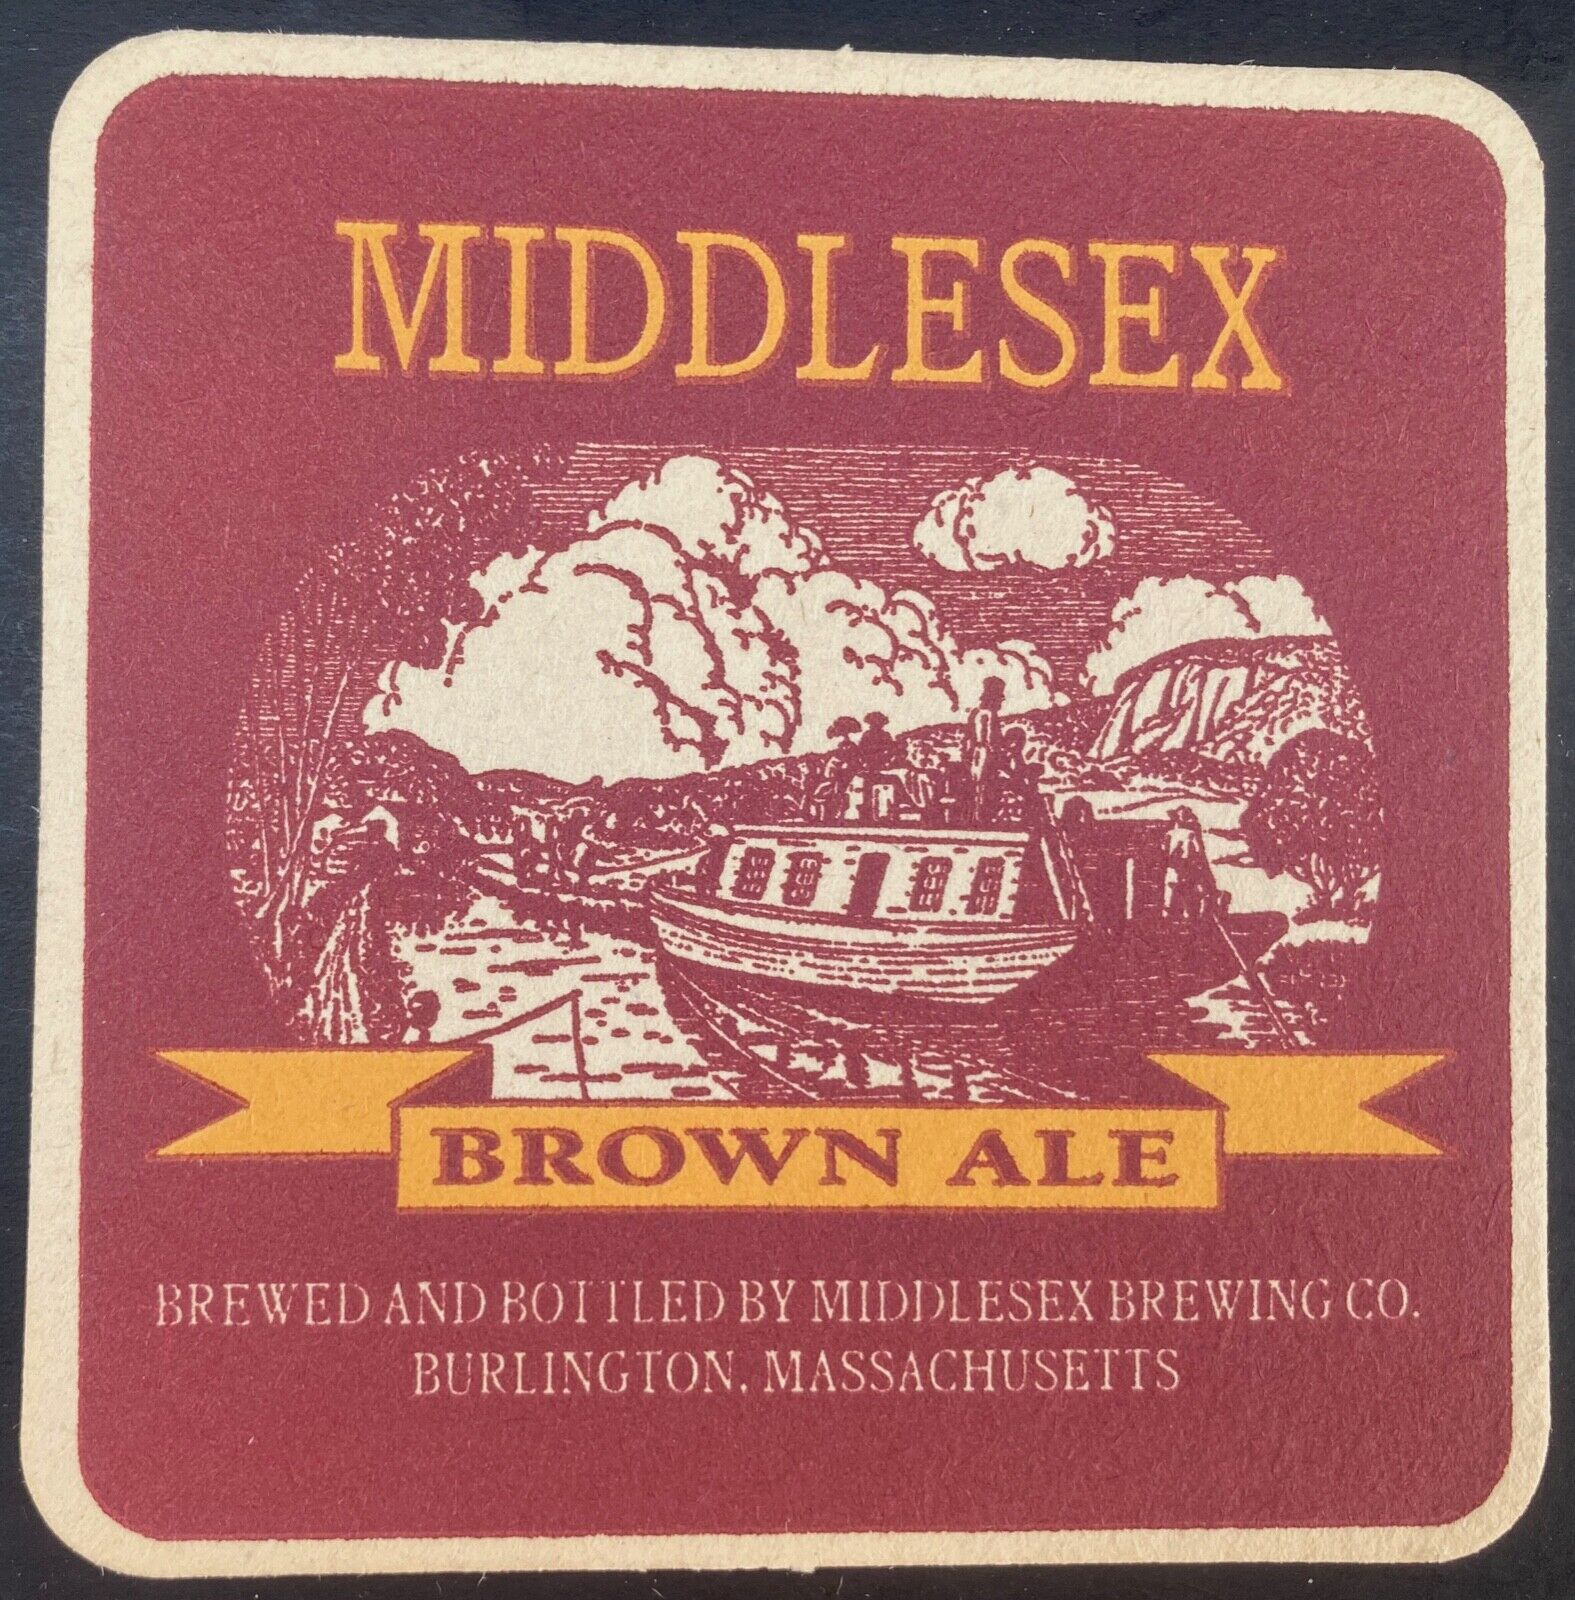 MIDDLESEX BROWN ALE BURLINGTON, MASS. 4 INCH SQUARE BEER COASTER 